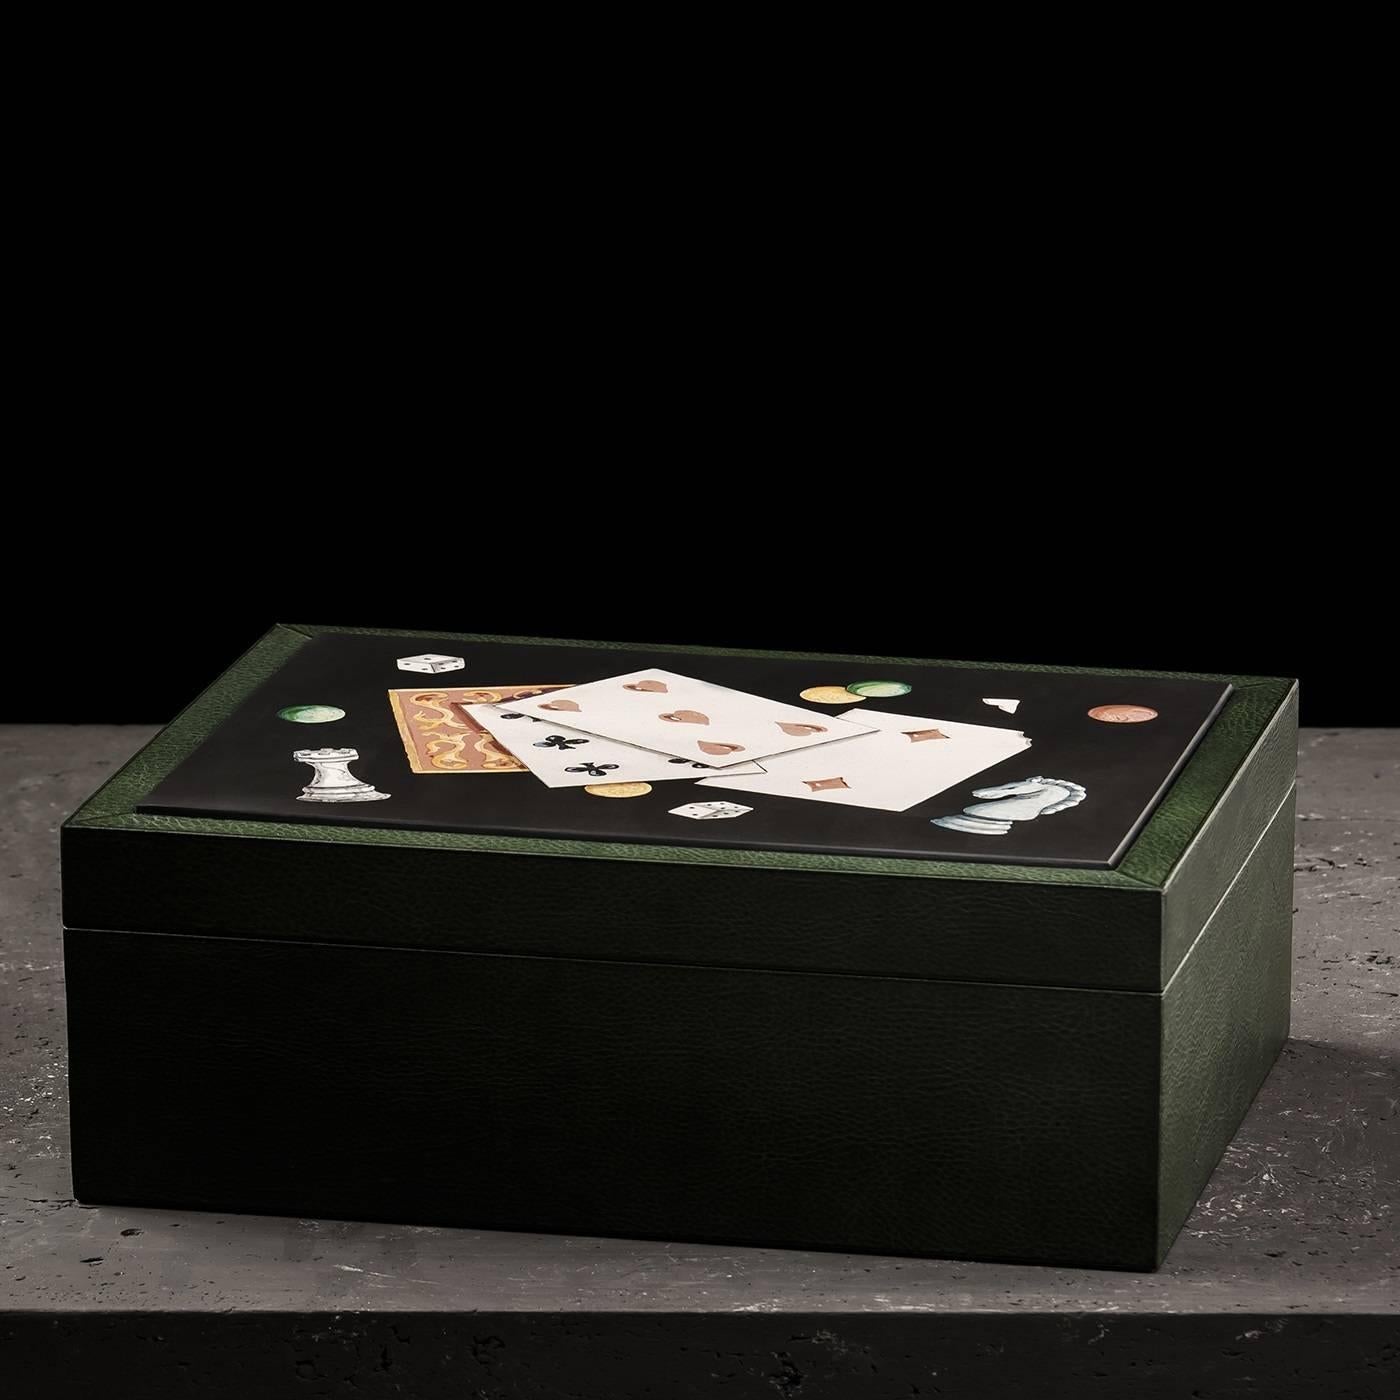 This piece is part of the Luxury collection by Bianco Bianchi and it can be used to store cards and dice for a game, or to store other small objects. This box was made entirely by hand in wood and then covered in Tuscan cow leather. The lid of the